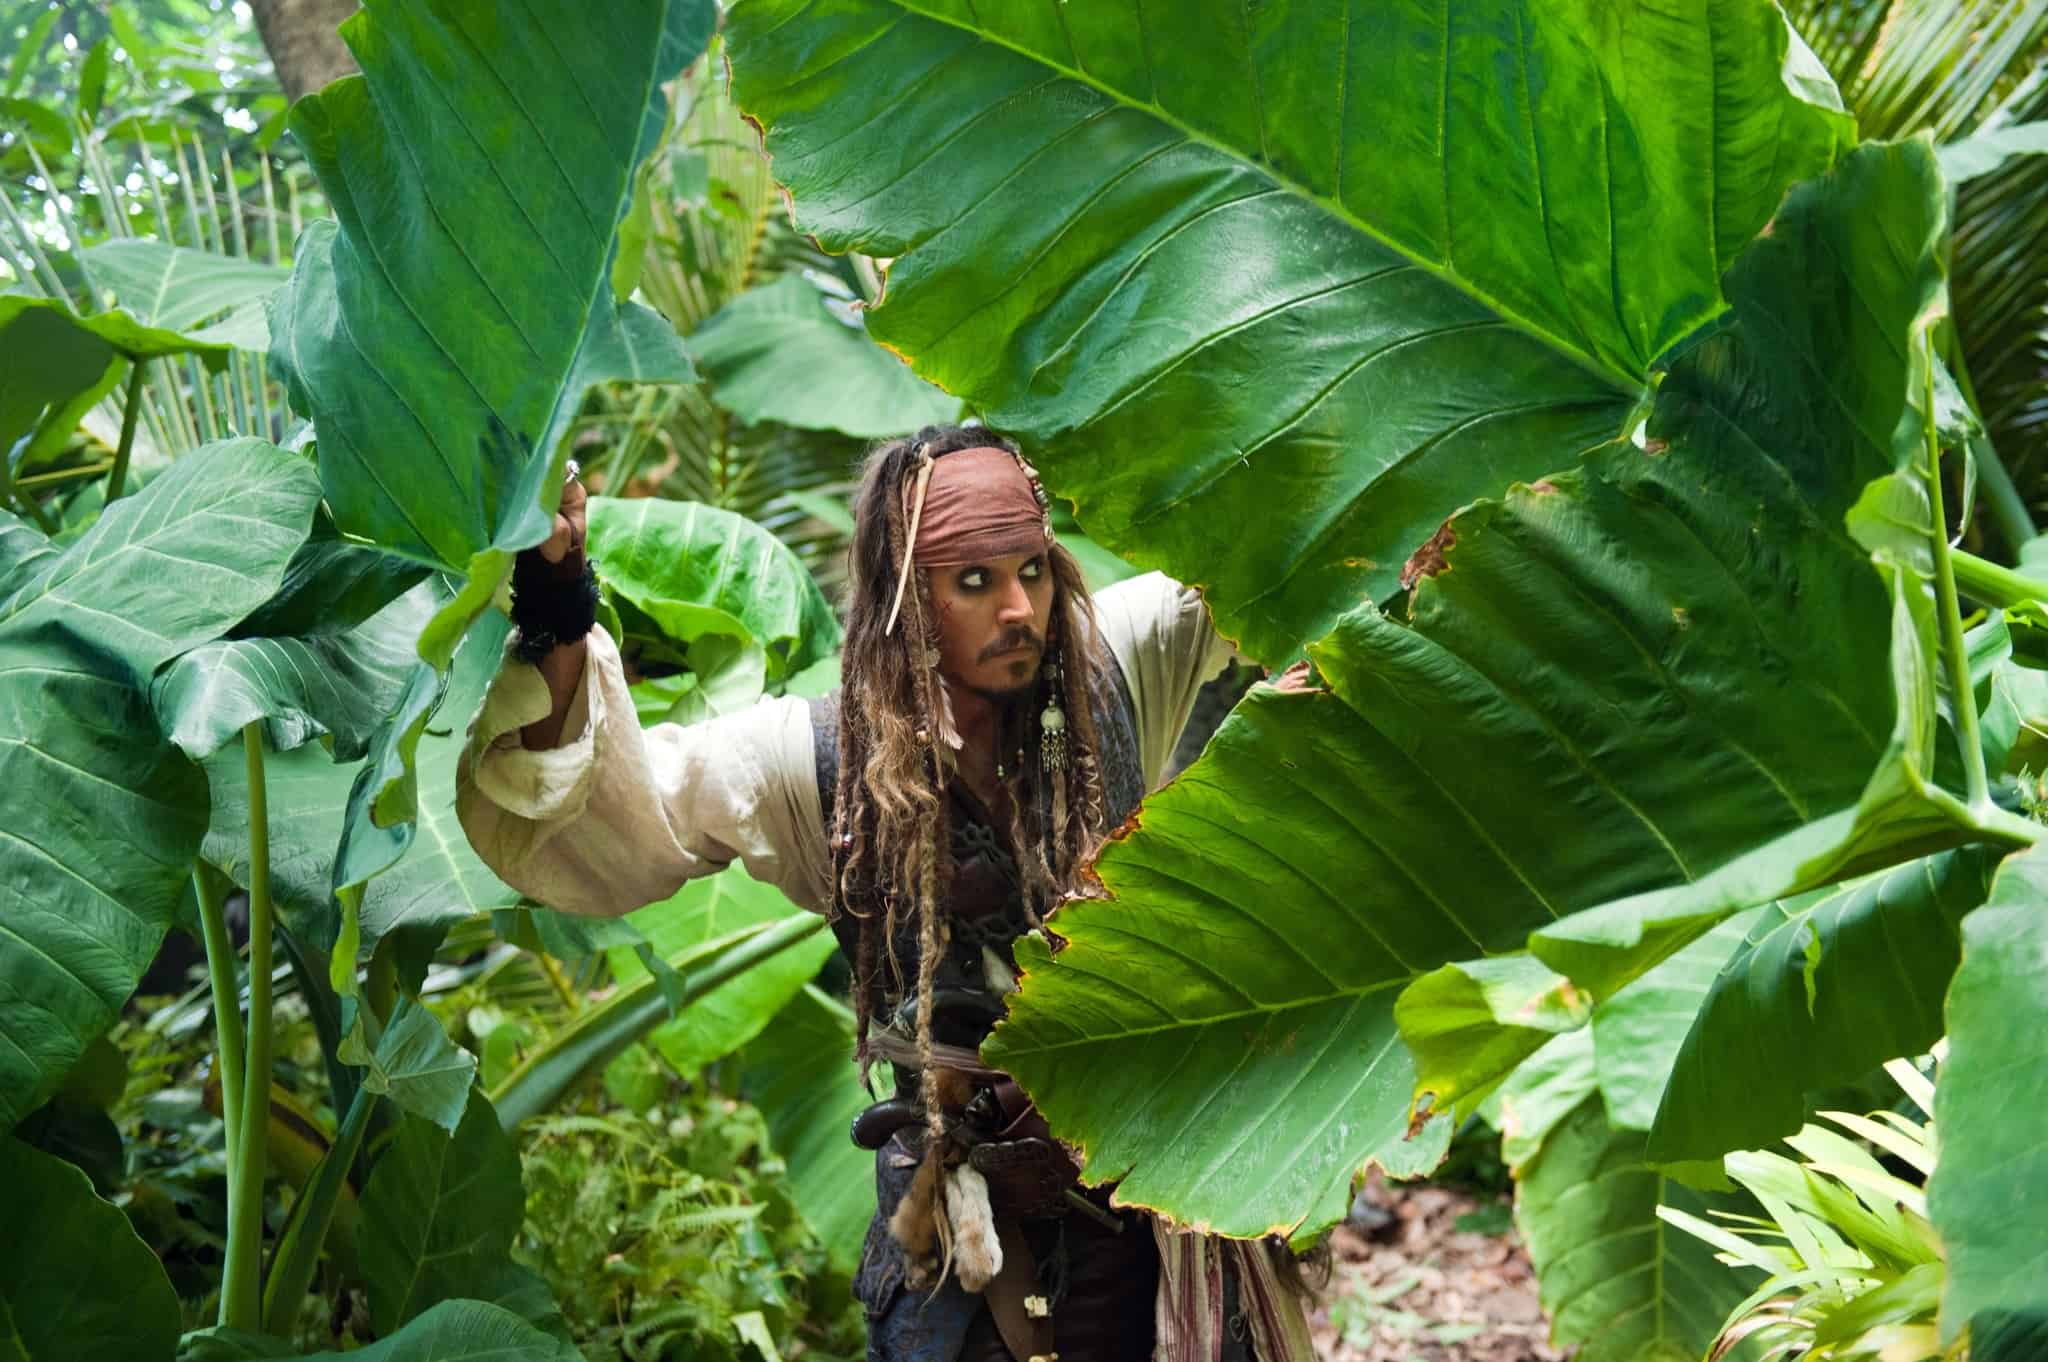 Captain Jack Sparrow trekking through the jungle in this photo from Walt Disney Pictures